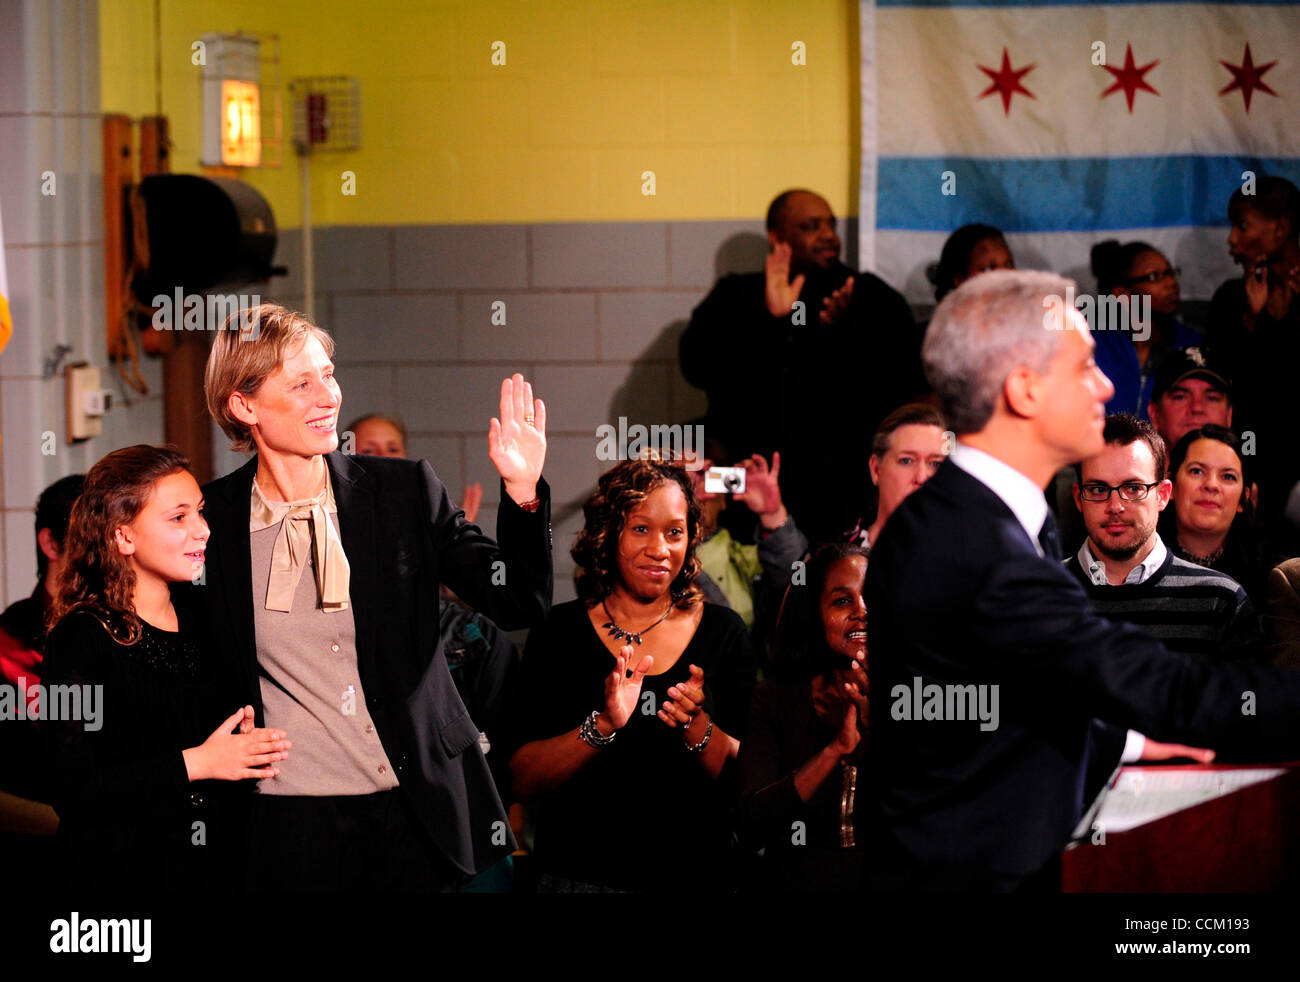 Nov 13, 2010 - Chicago, Illinois, U.S. - Rahm Emanuel announces his candidacy for Mayor of Chicago at the John C. Coonley School on Saturday, November 13, 2010. Ater initially being cleared as eligible to run for mayor (his eligibility was challenged on the basis of his lack of residency in Chicago  Stock Photo